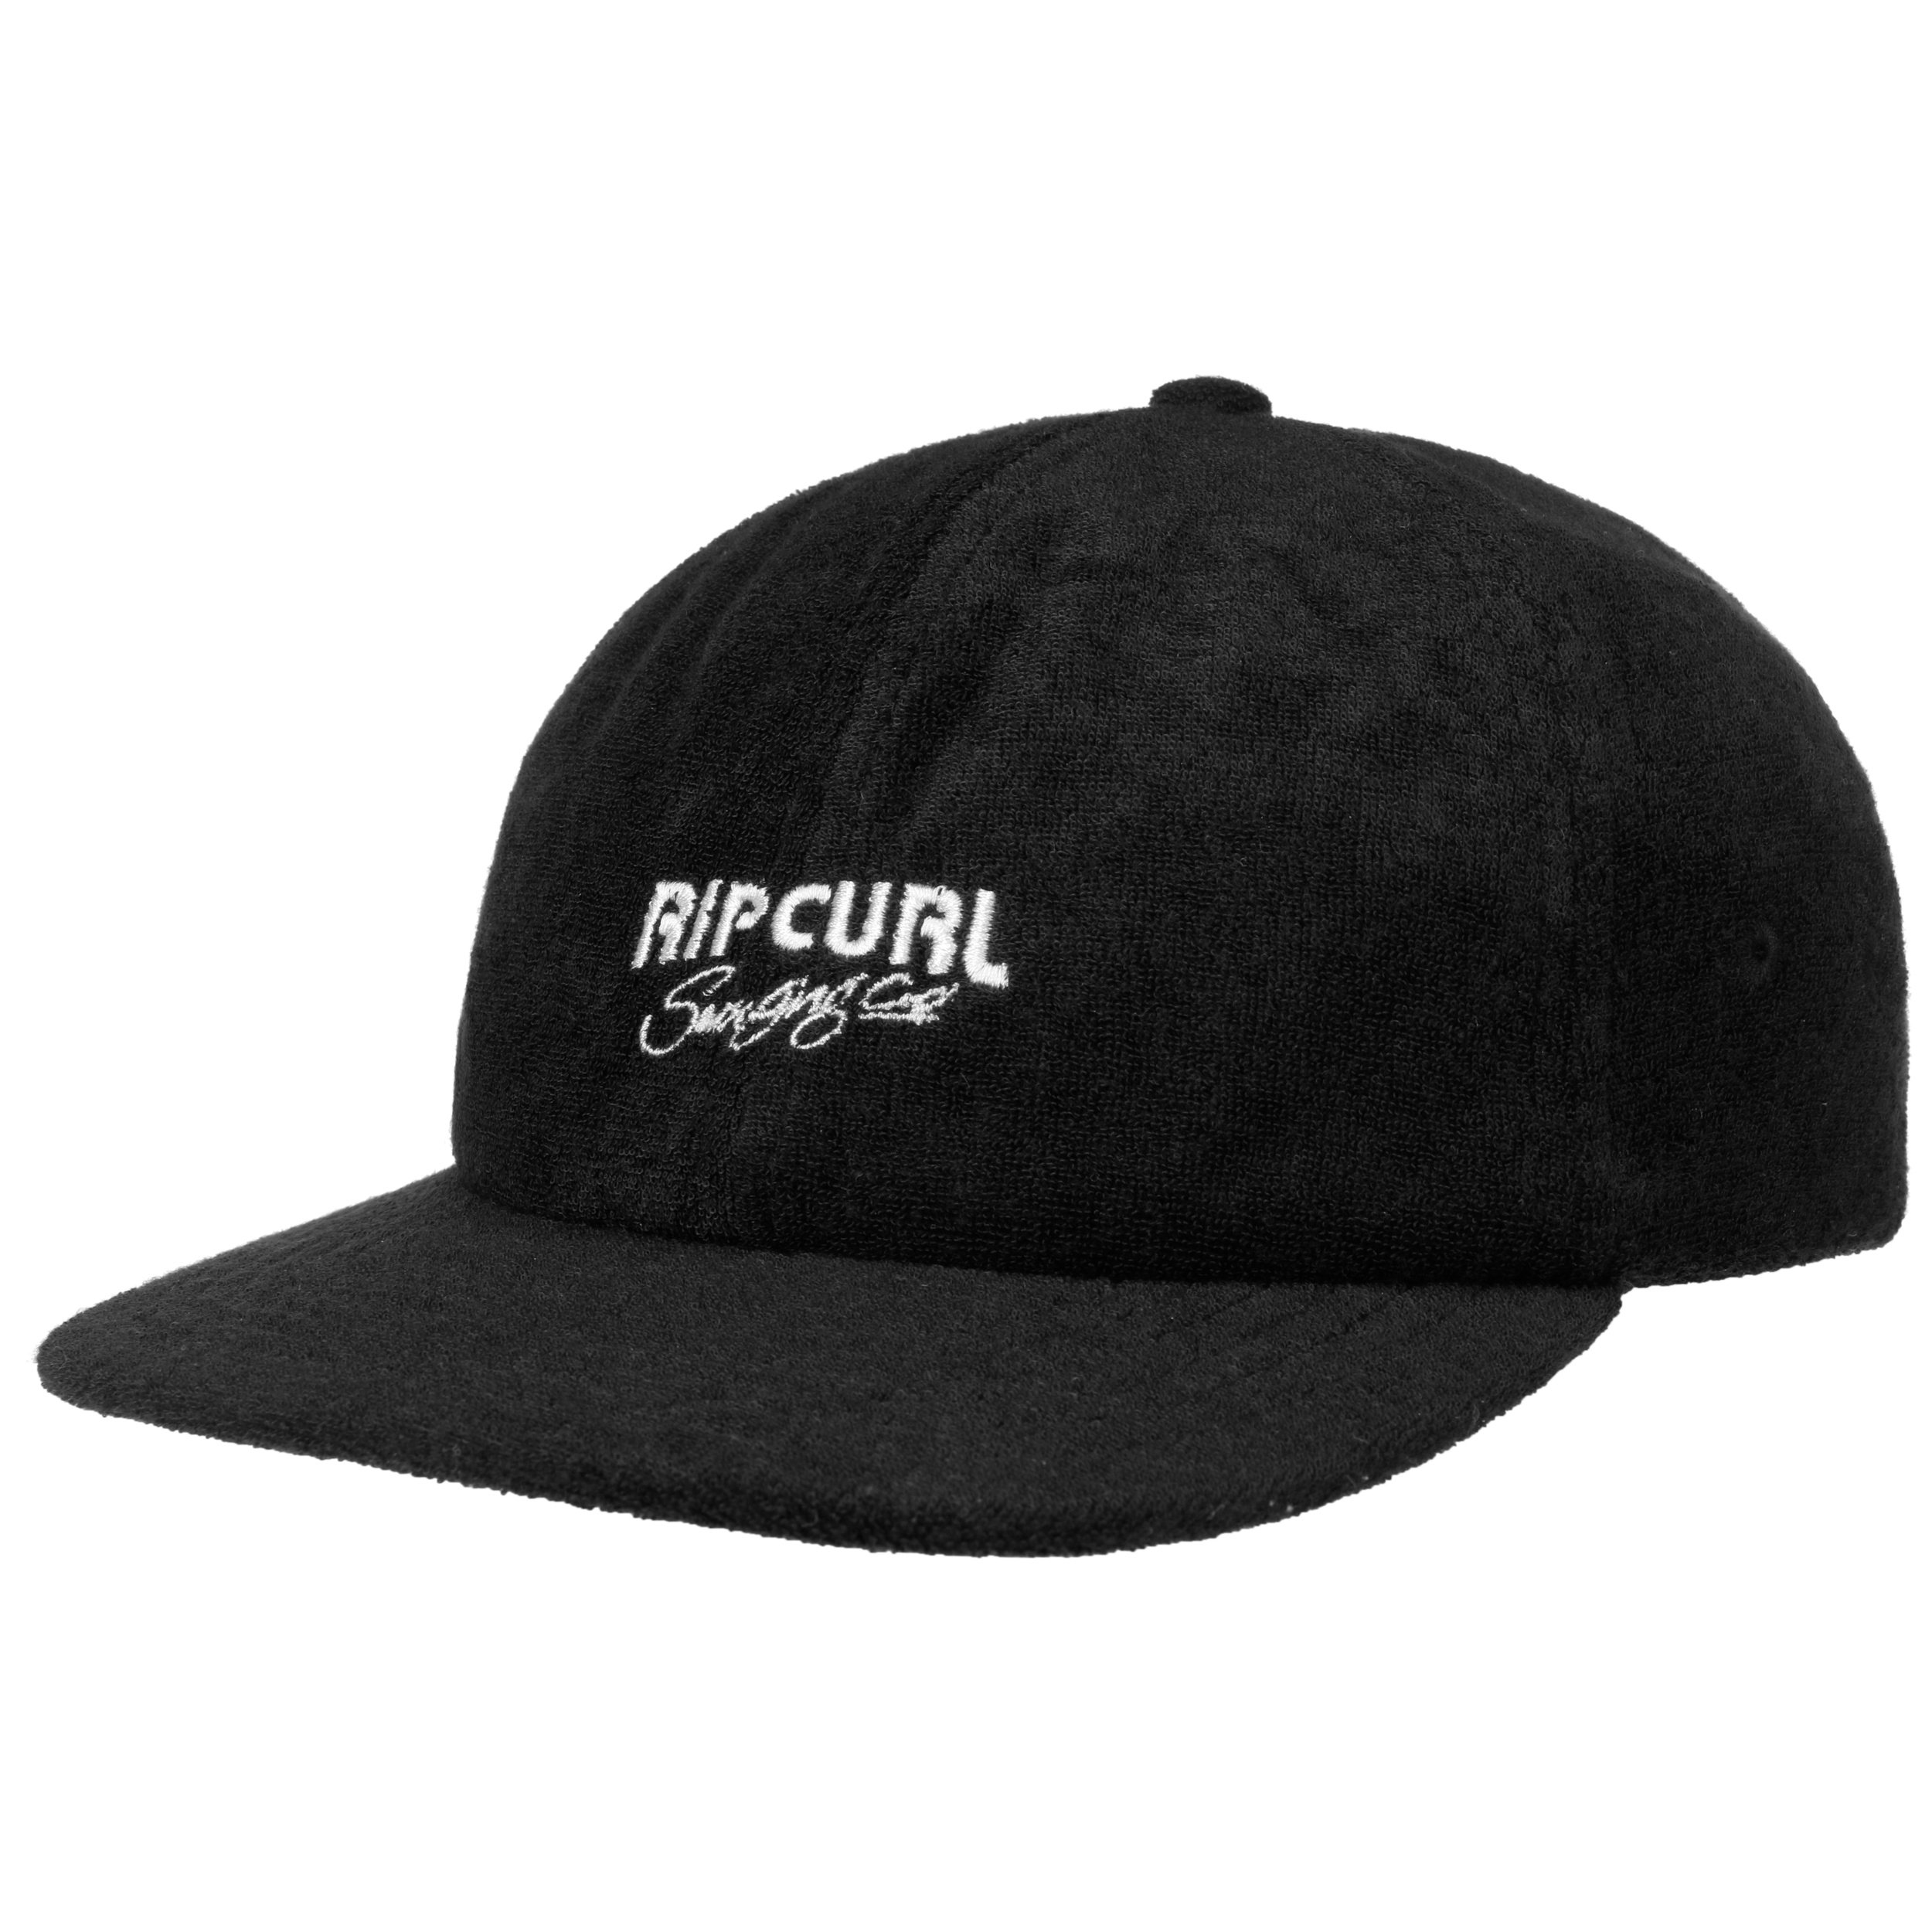 Surf Revival Snap Cap by Rip Curl - 29,95 €